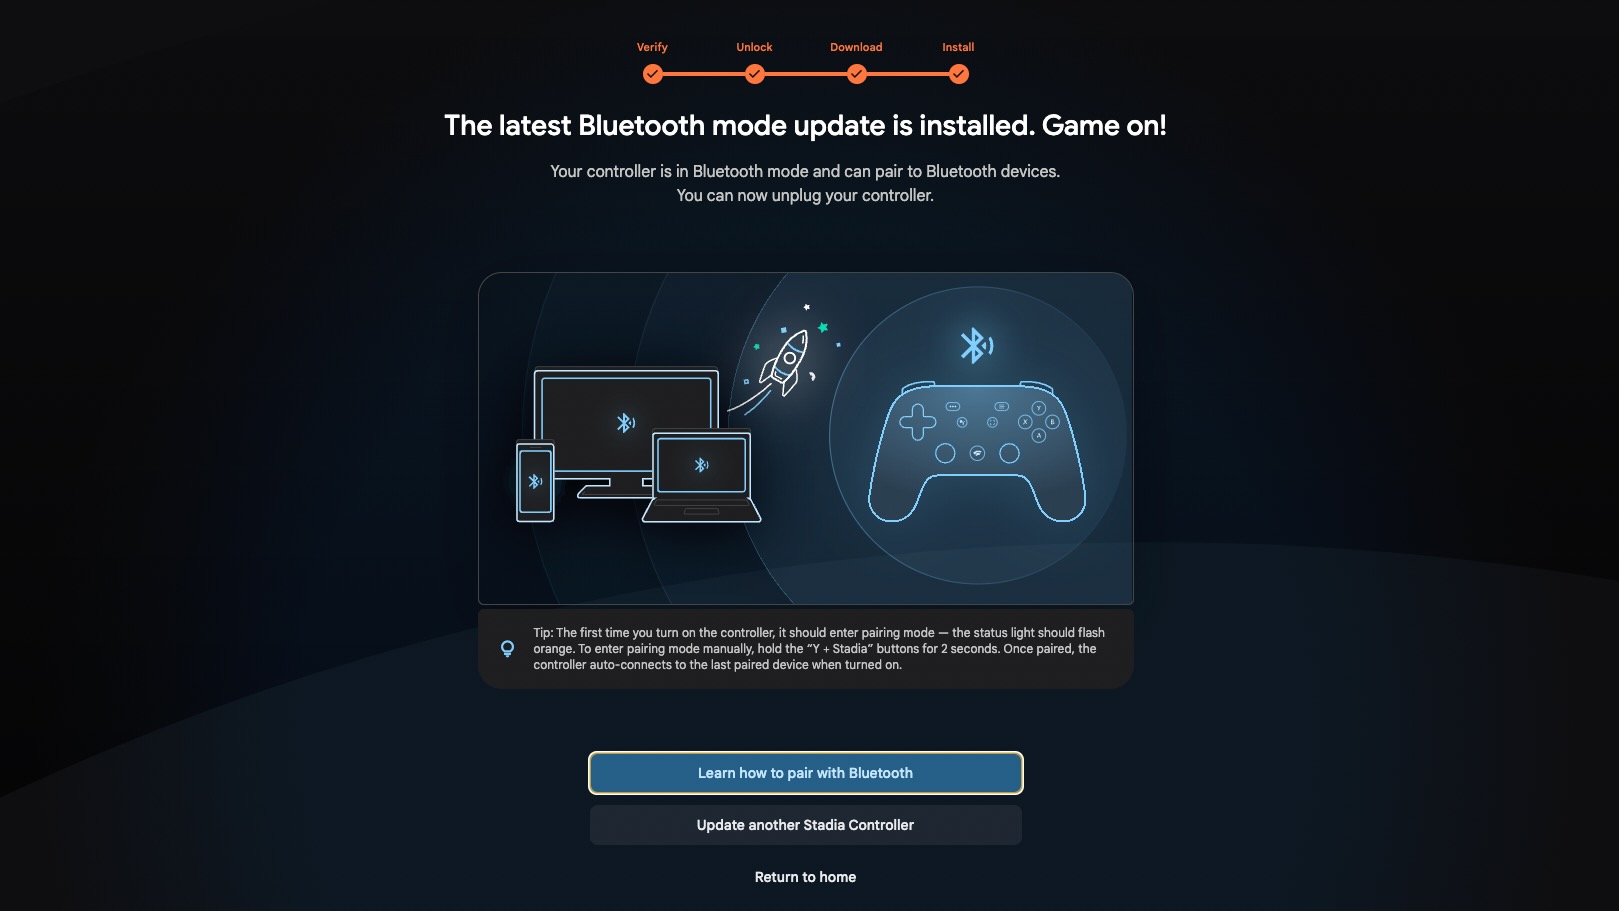 The success page shown after you install Bluetooth on the Stadia Controller.